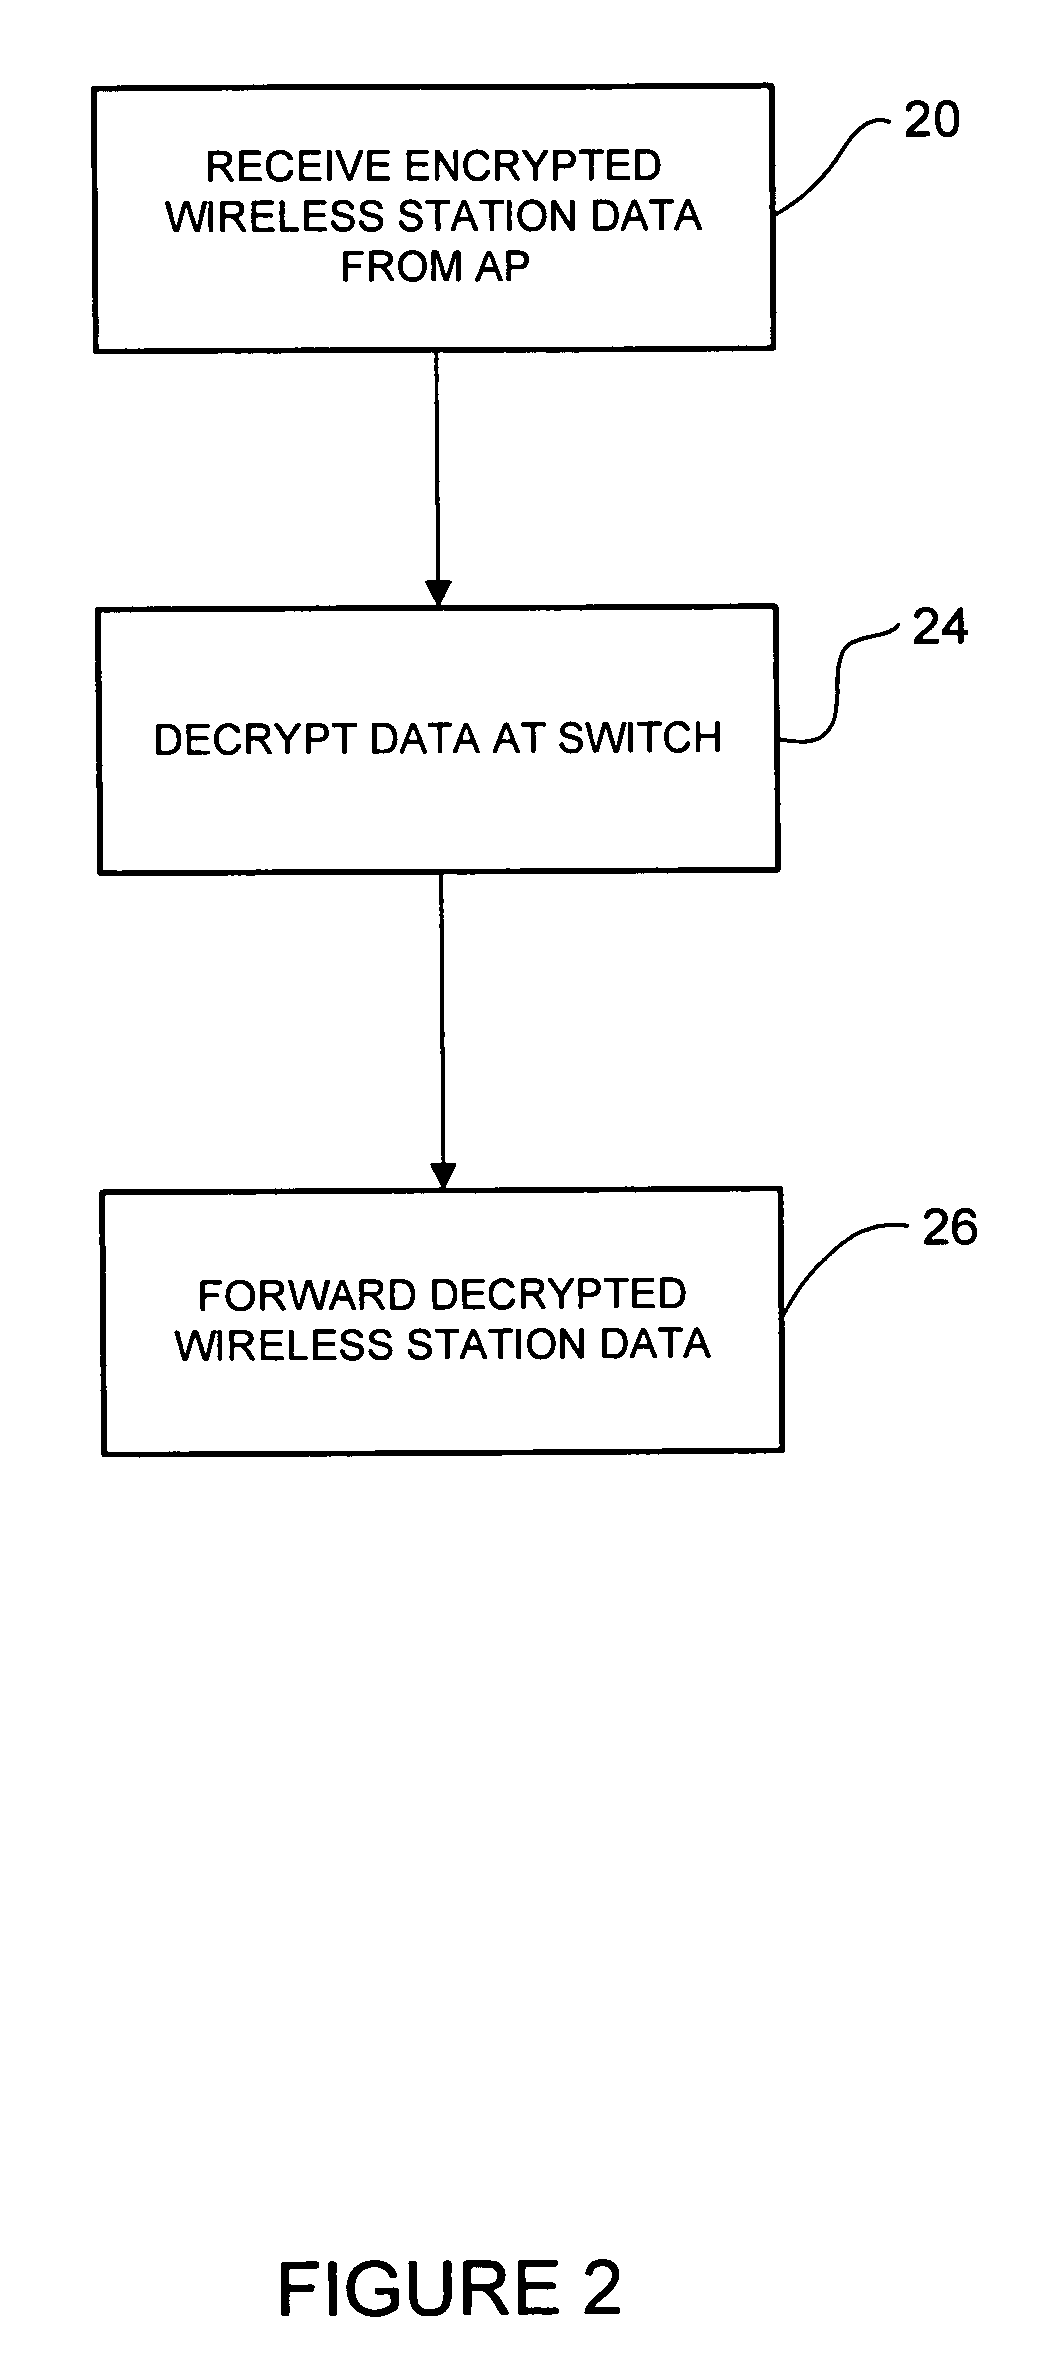 Efficient data path encapsulation between access point and access switch